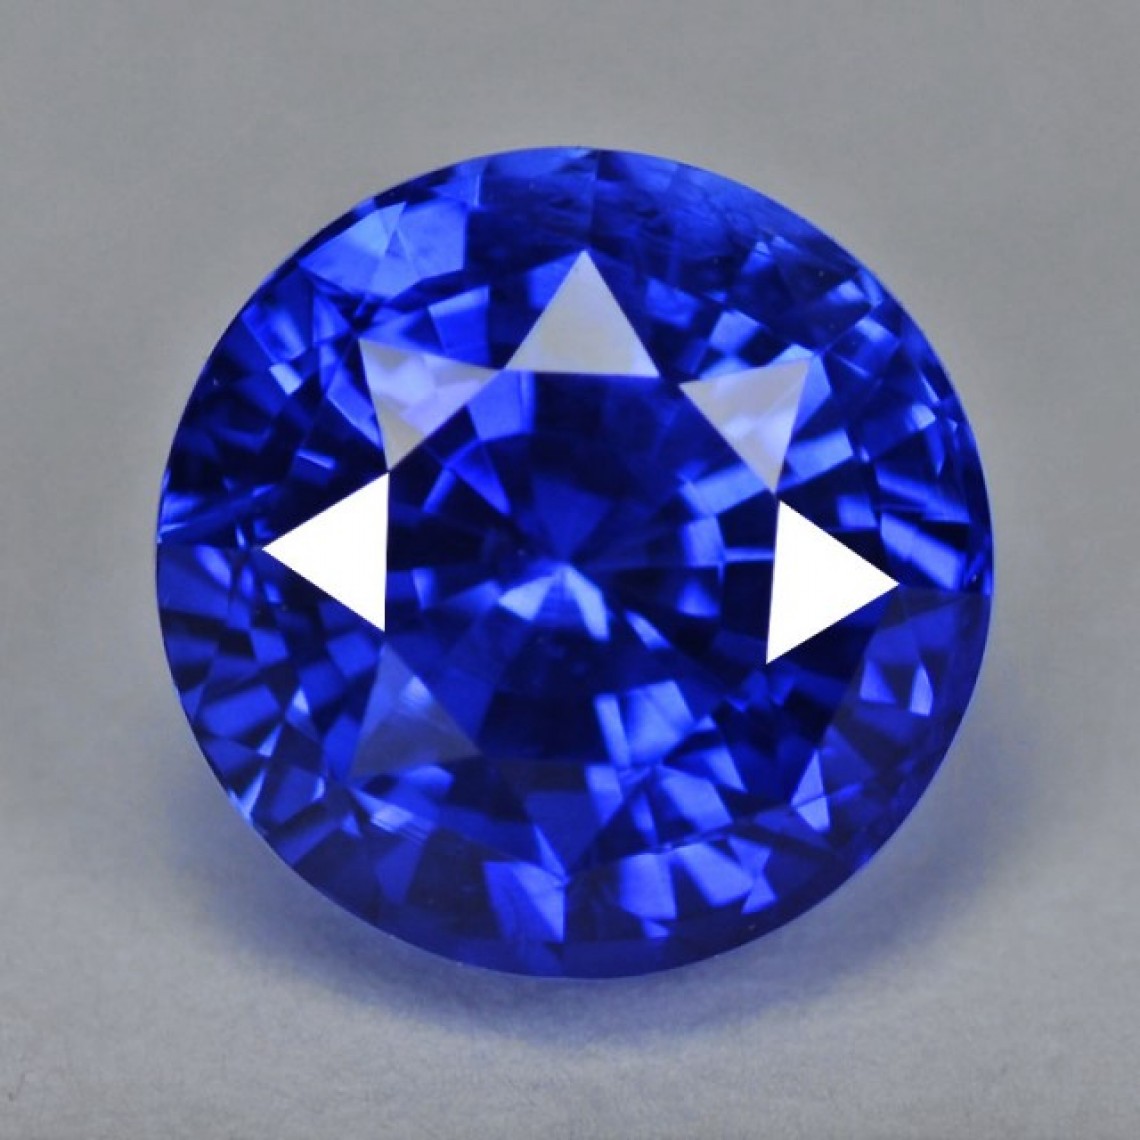 How to Choose Quality Sapphires